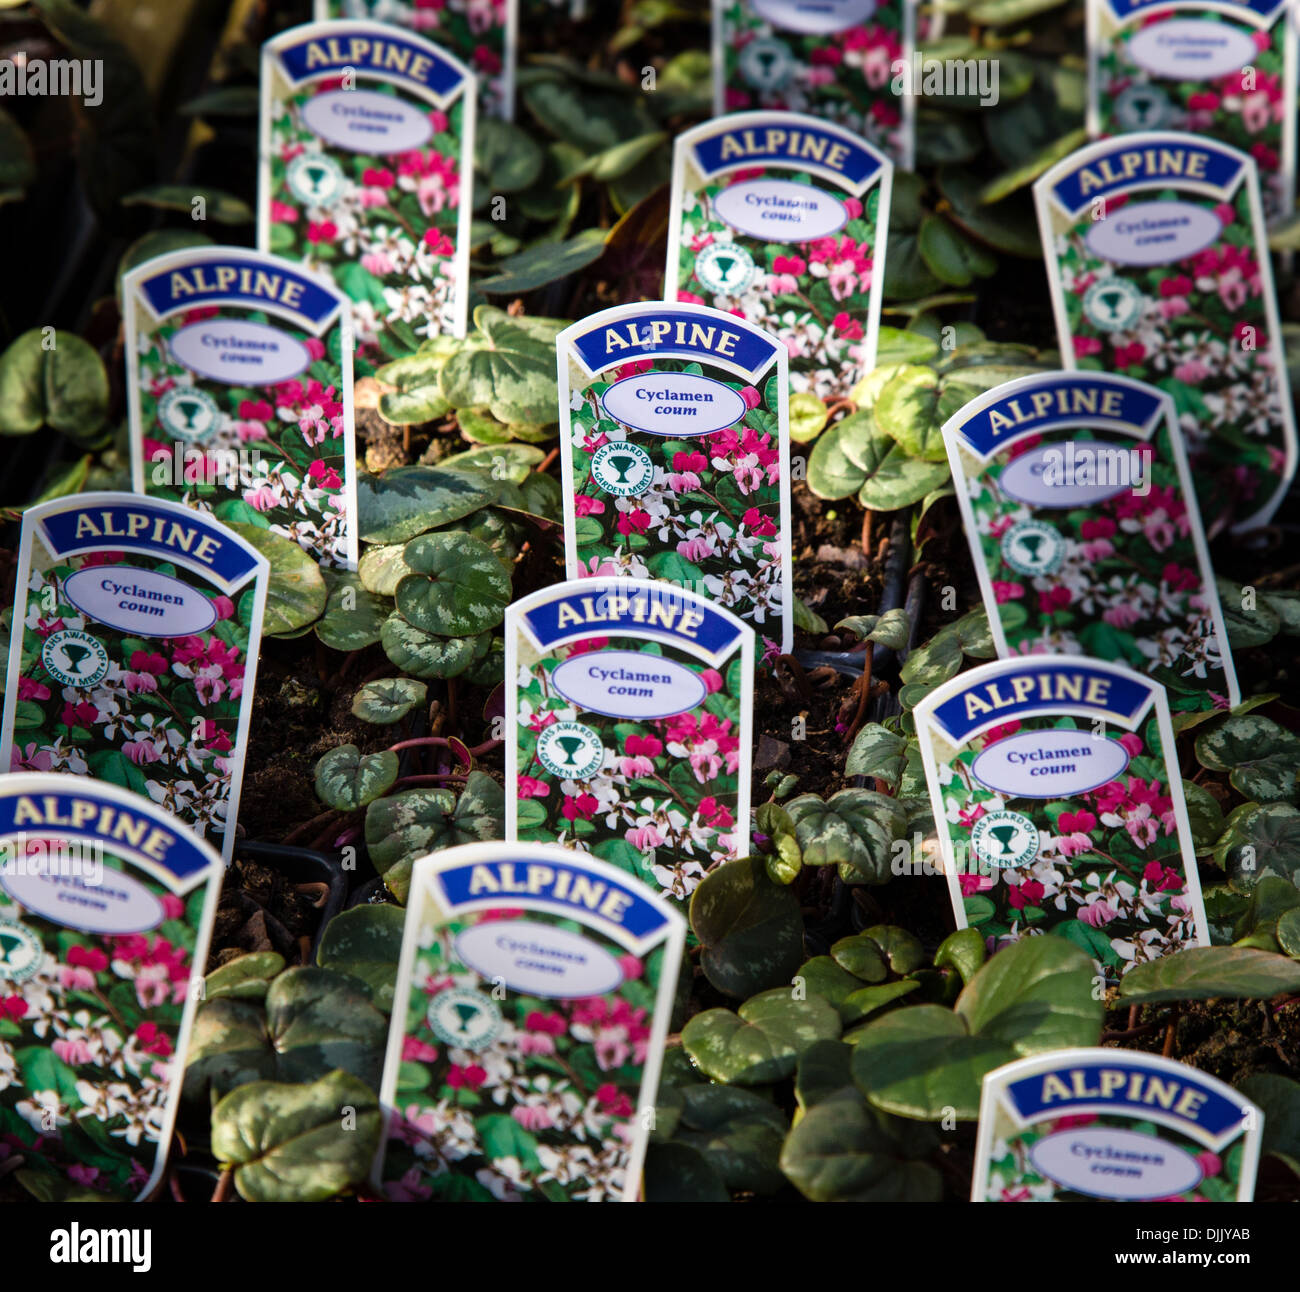 Alpine Cyclamen potted plants with plastic labels in a British garden centre Stock Photo